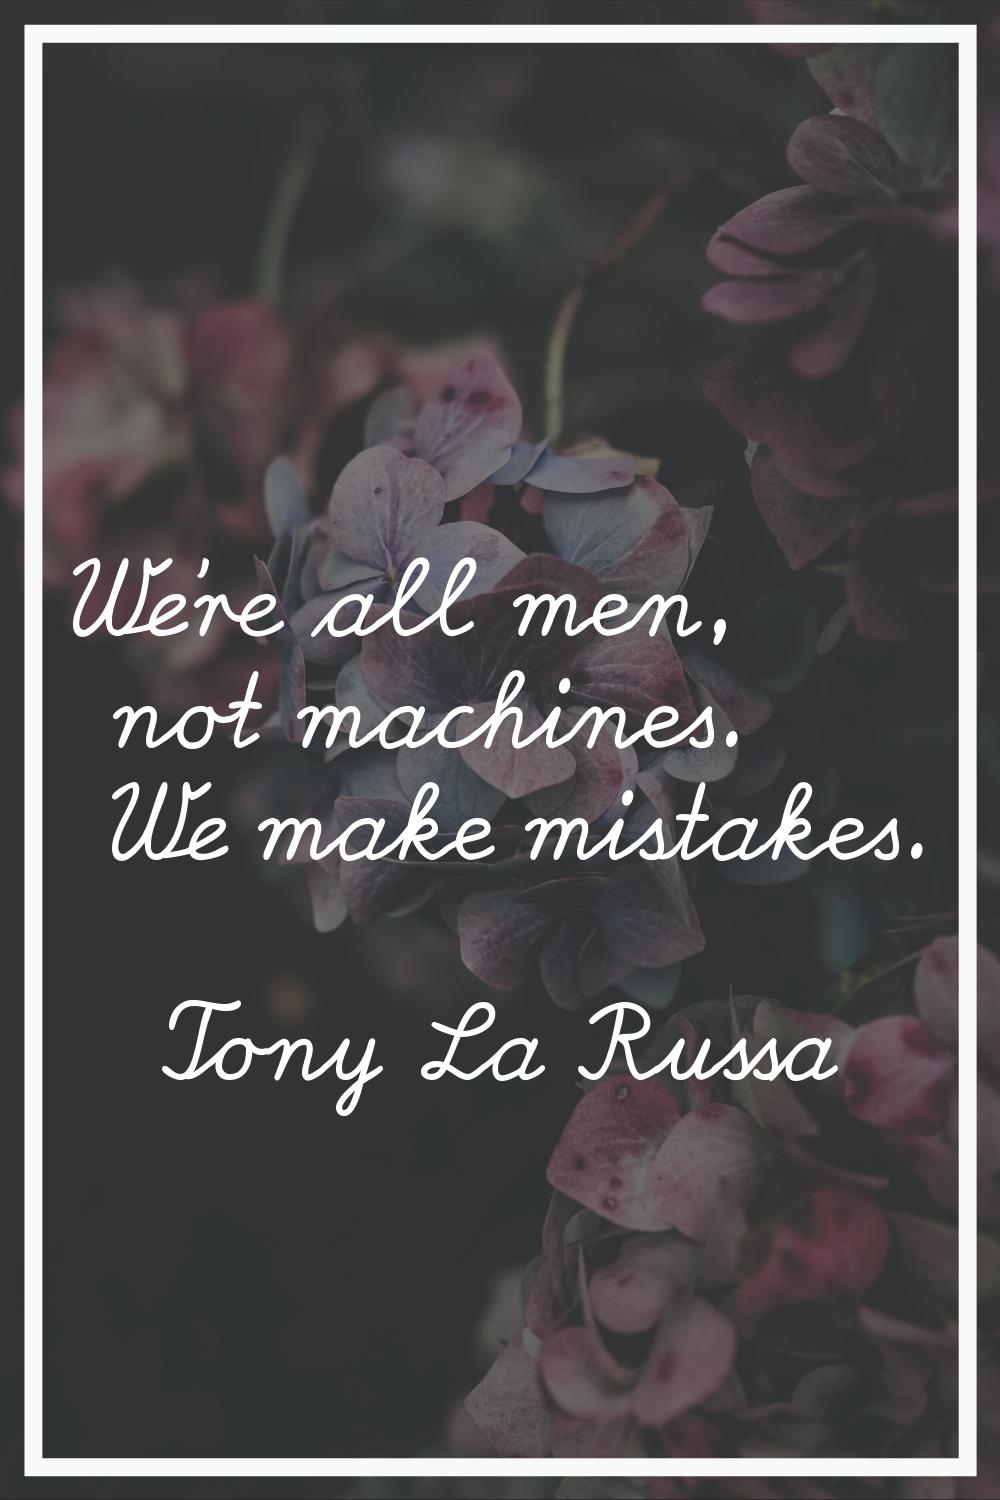 We're all men, not machines. We make mistakes.